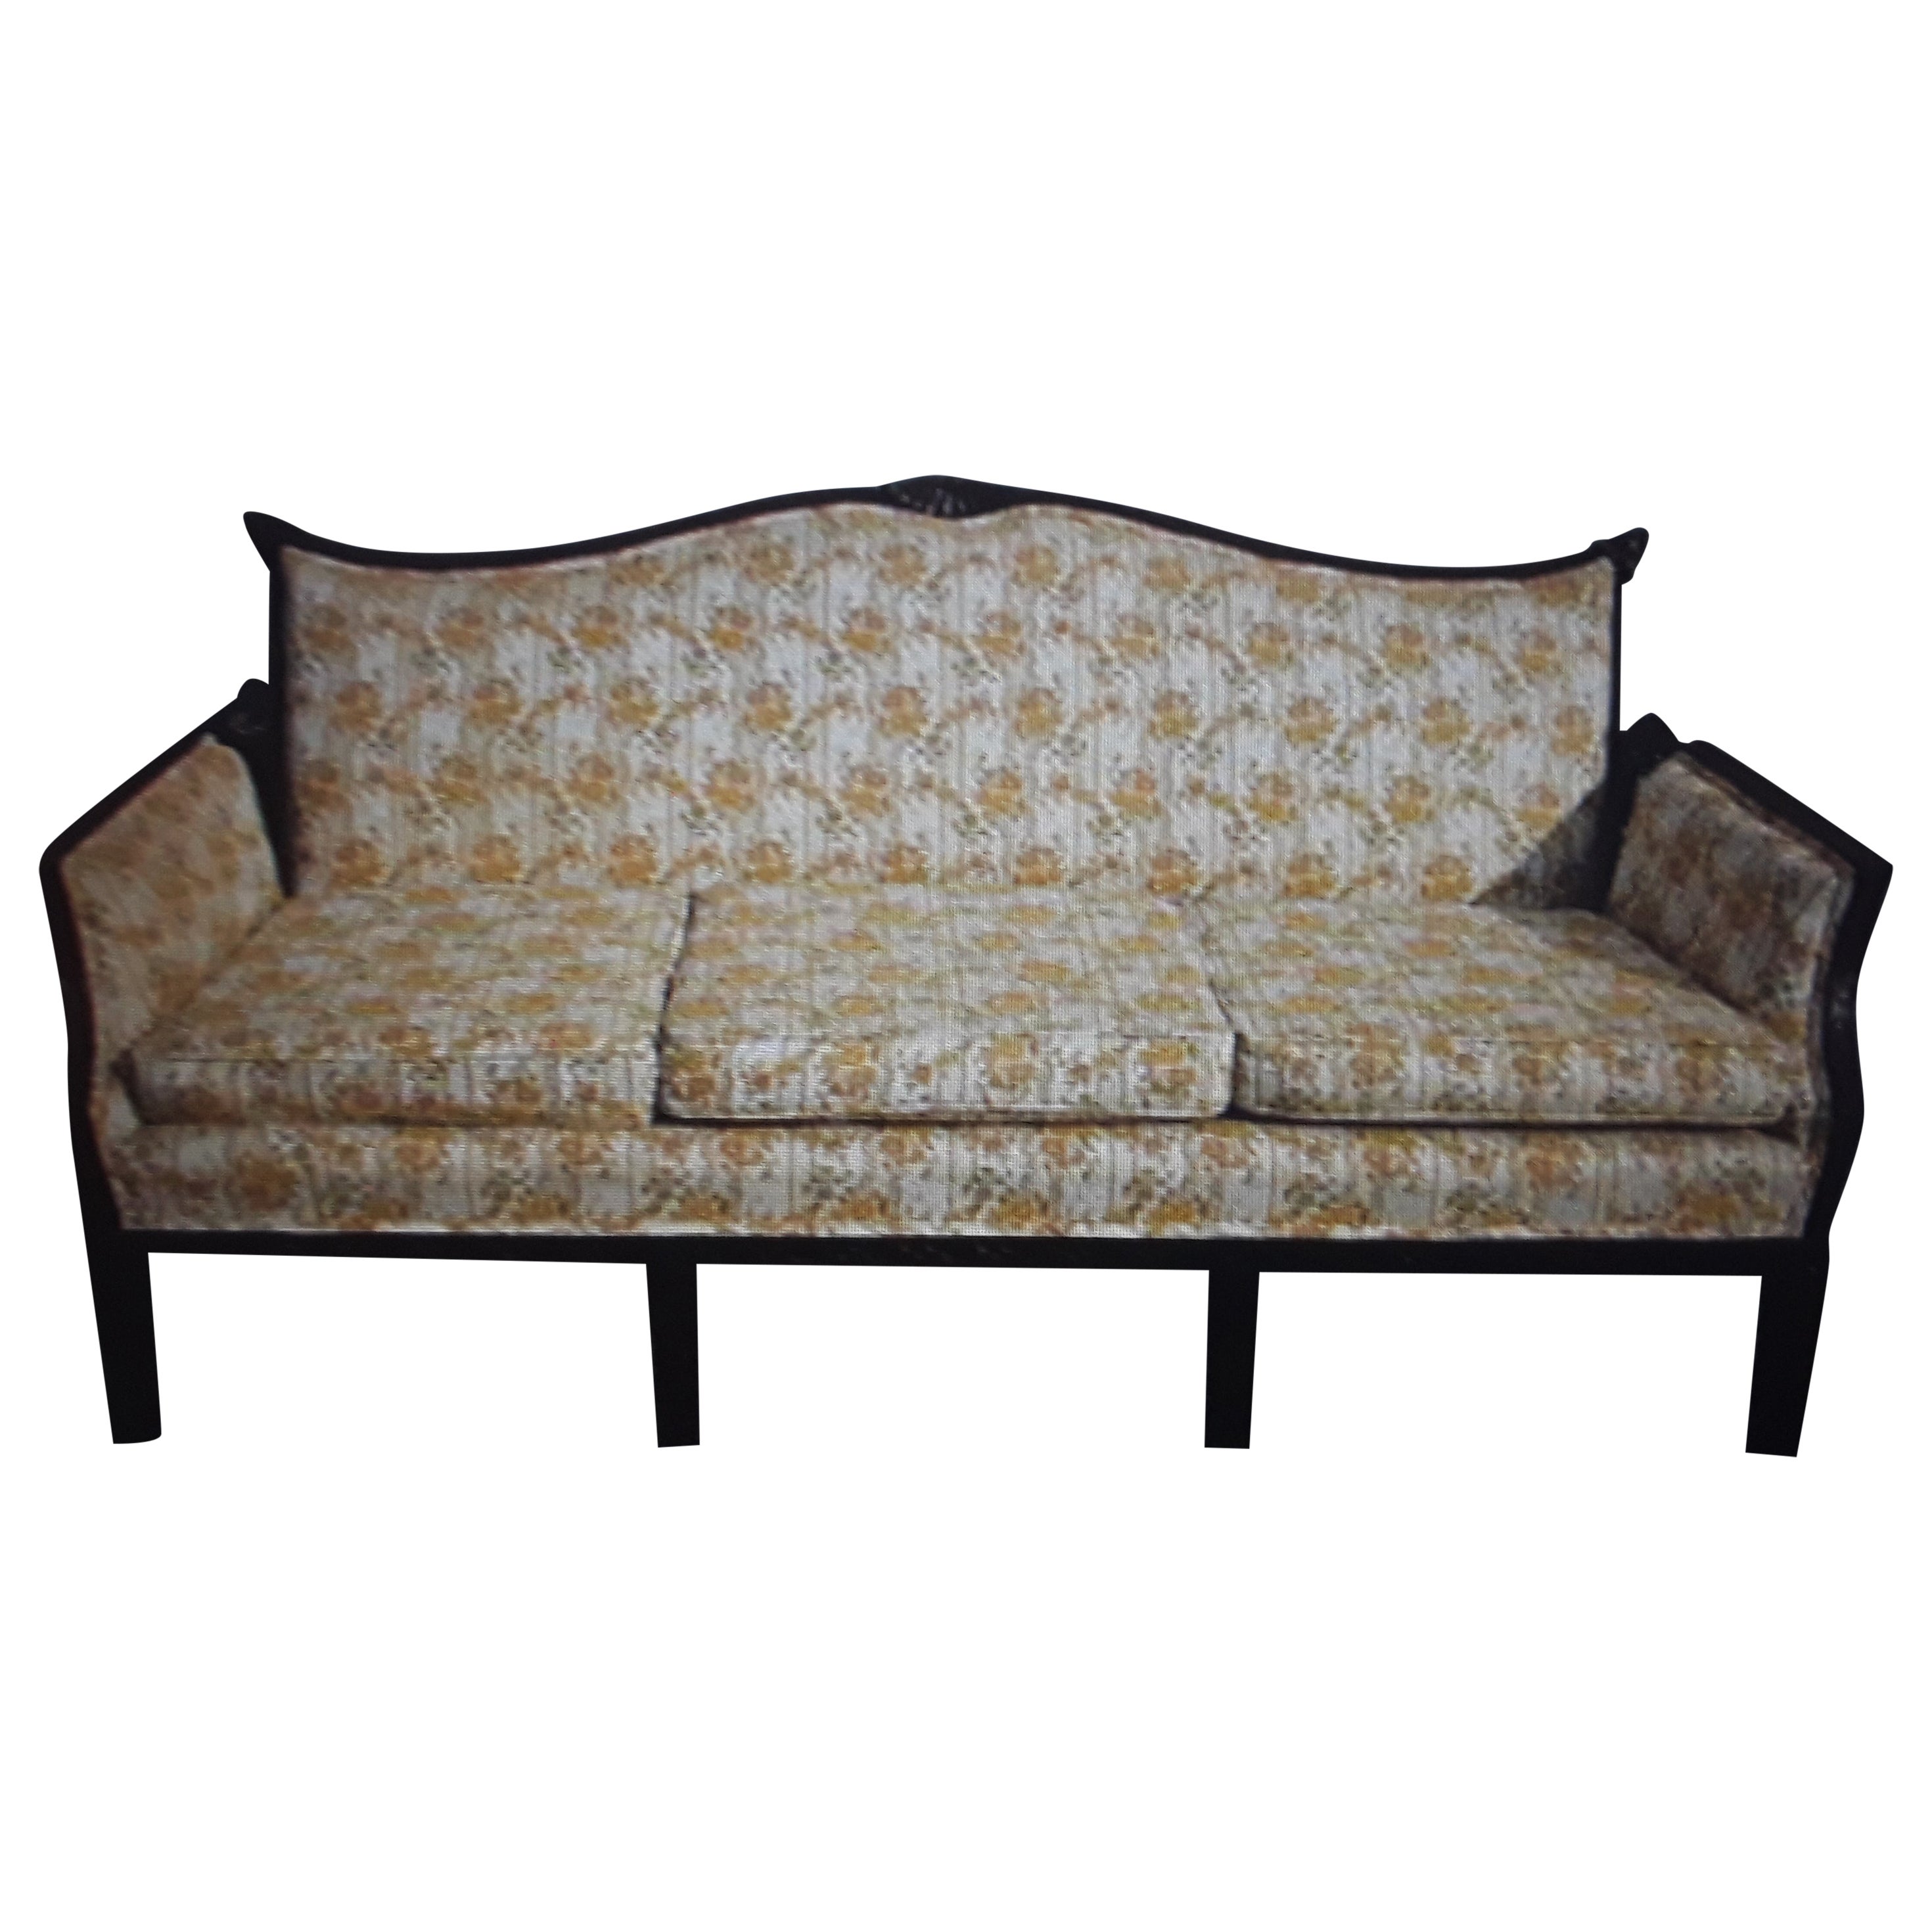 1950's Hollywood Regency Grand and Expertly Carved Sofa Chinoiserie/ Asian